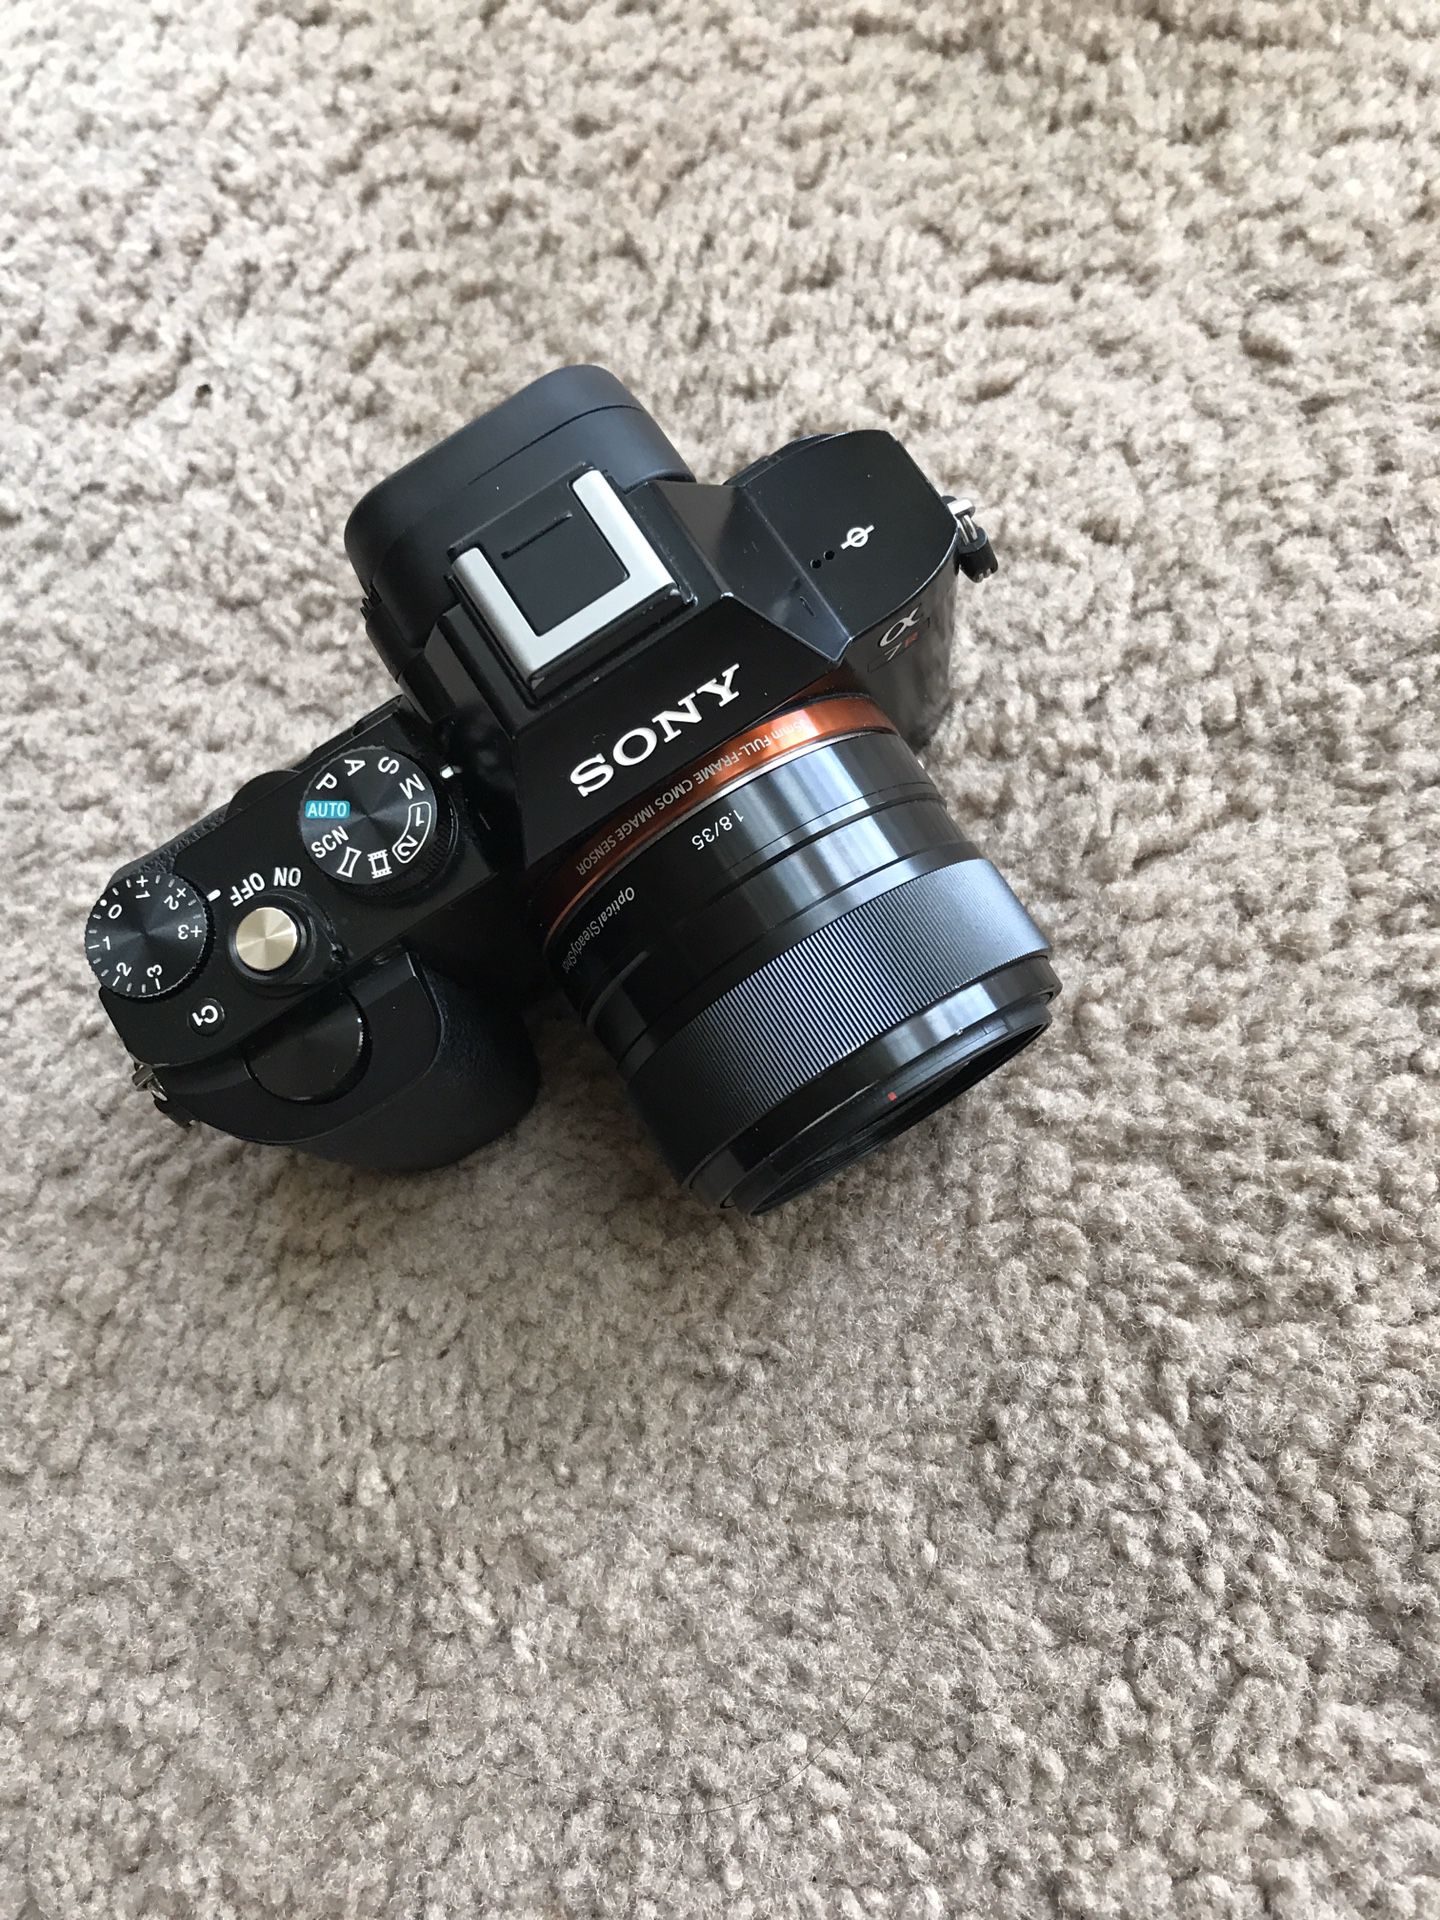 Sony A7R Mirrorless camera with Extras 35mm 1.8 lens